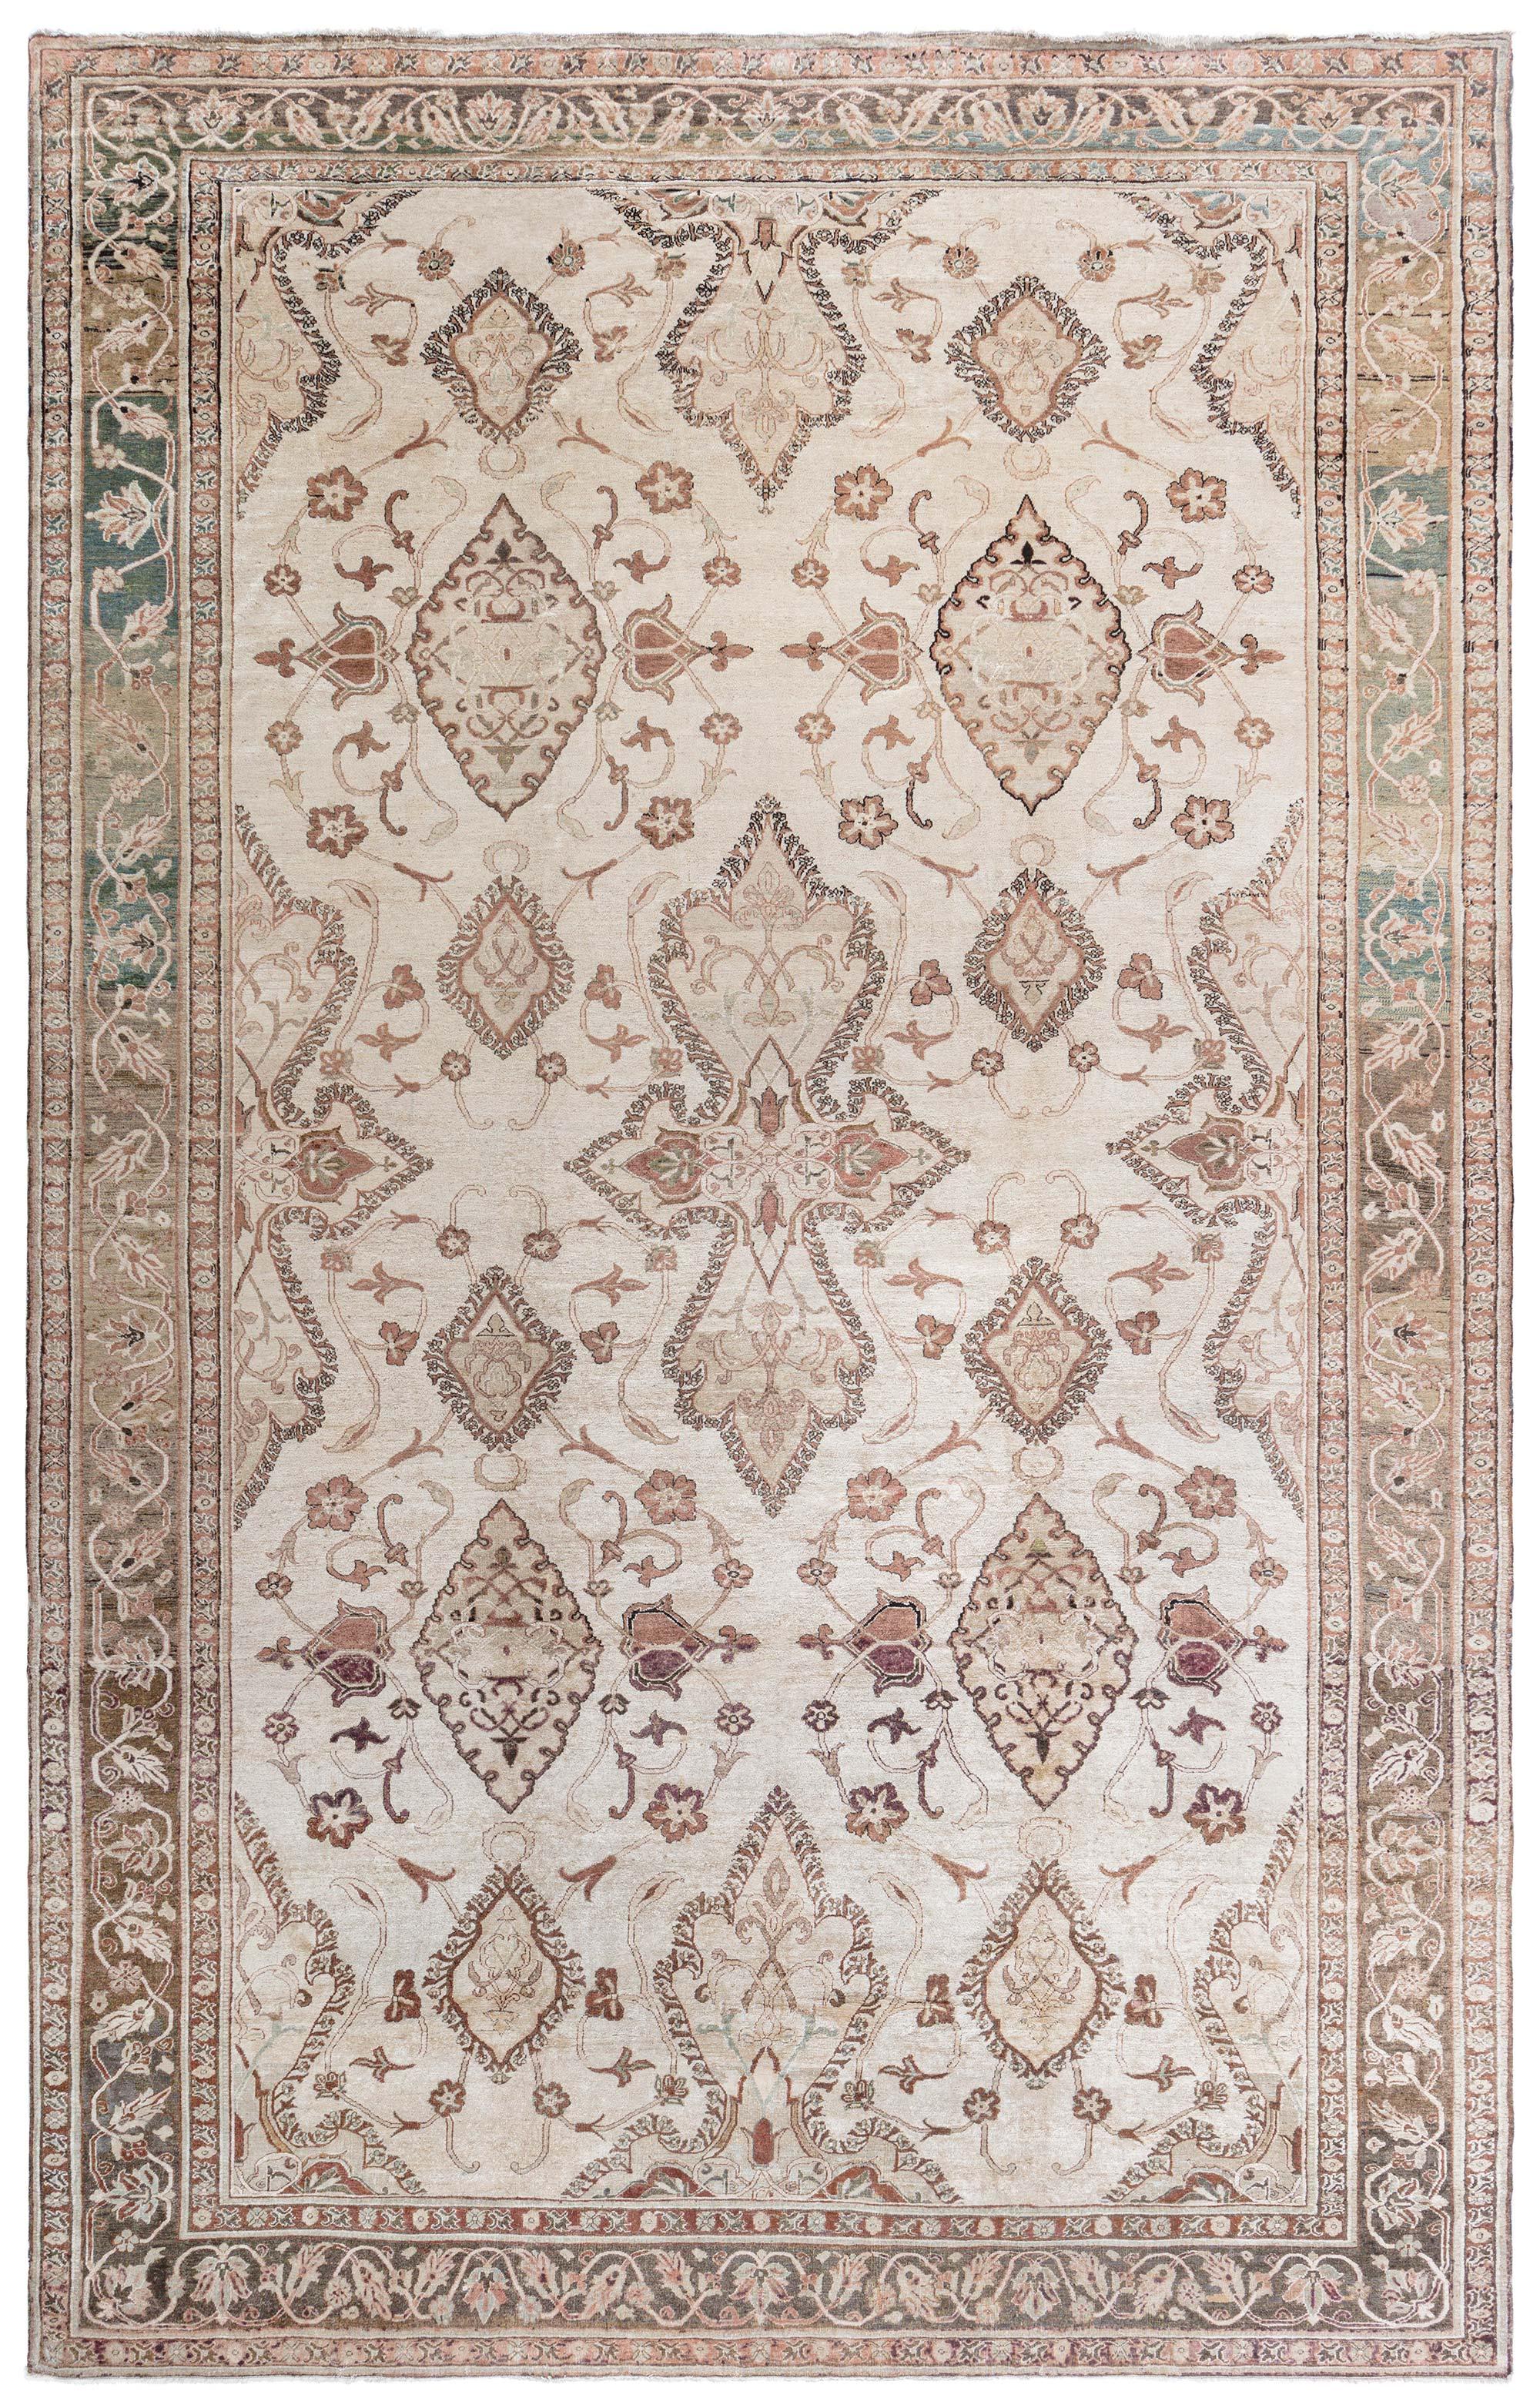 Antique Indian Amritsar Handmade Wool Rug For Sale